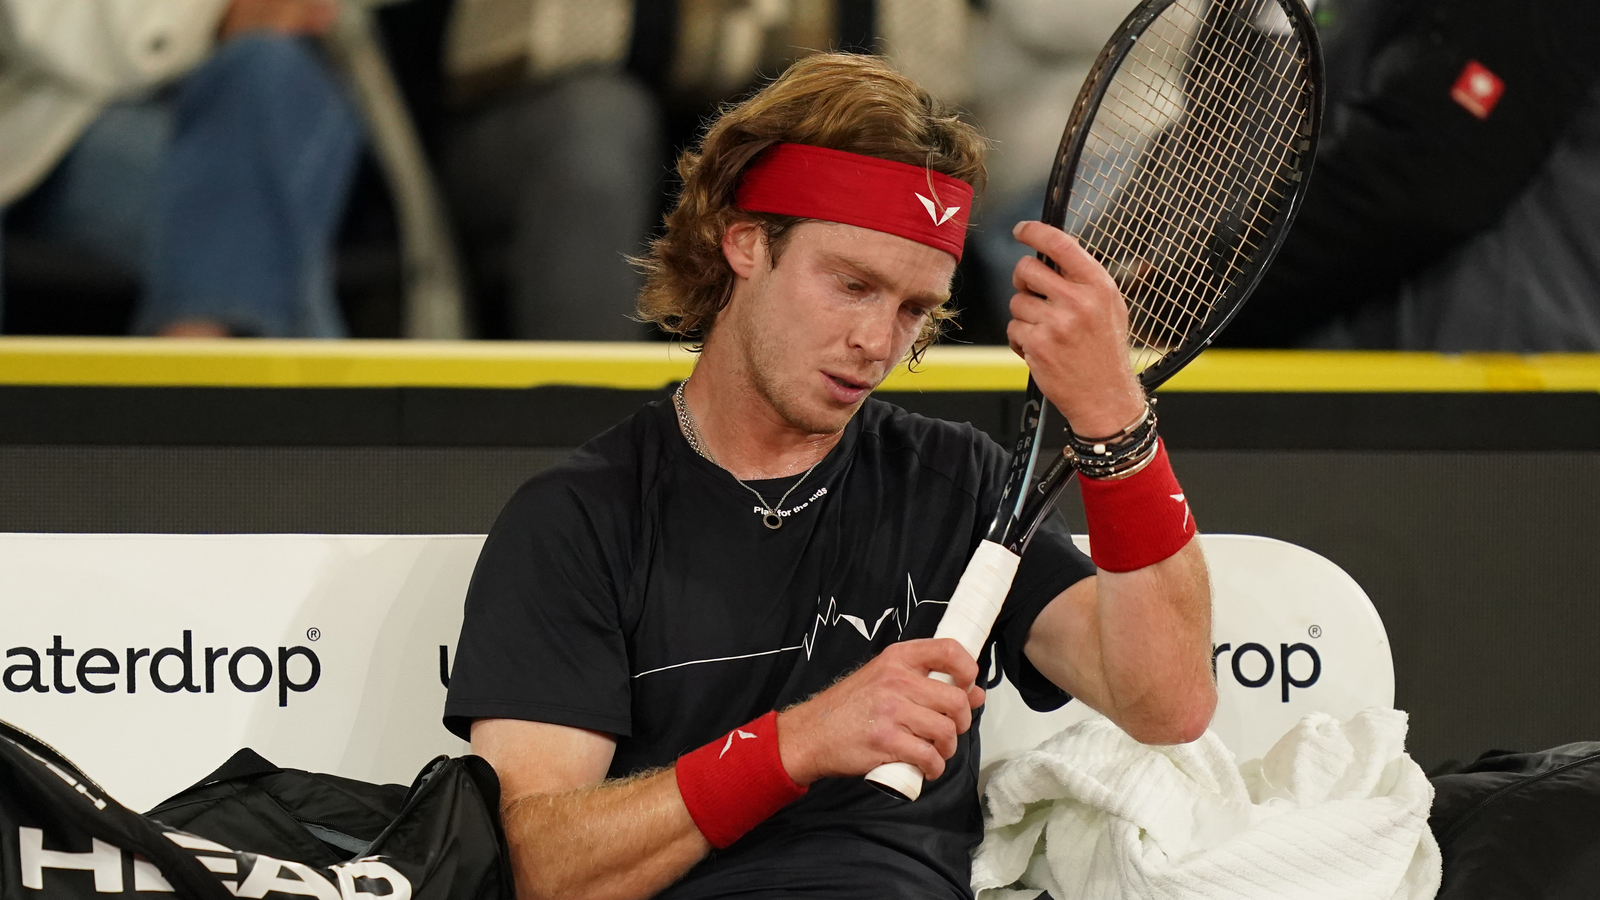 Upset Alert: Rublev Eliminated In His First Match In Toronto By McDonald